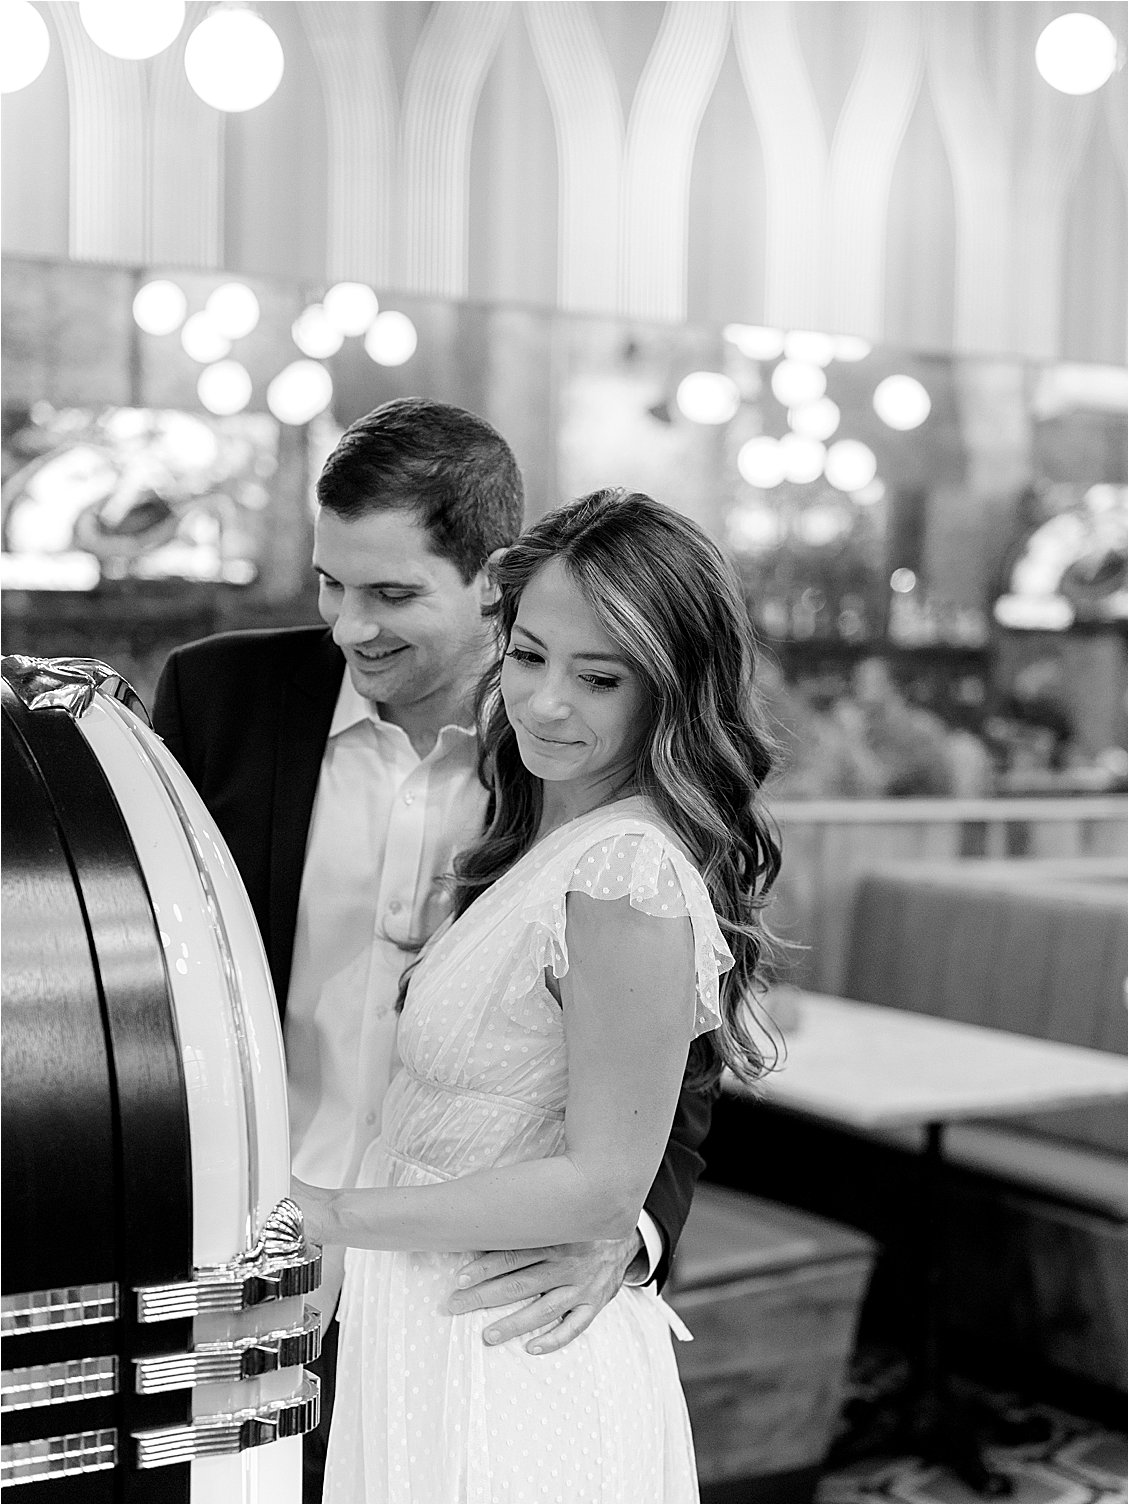 Classic Black and White Restaurant Engagement Session with a Jukebox